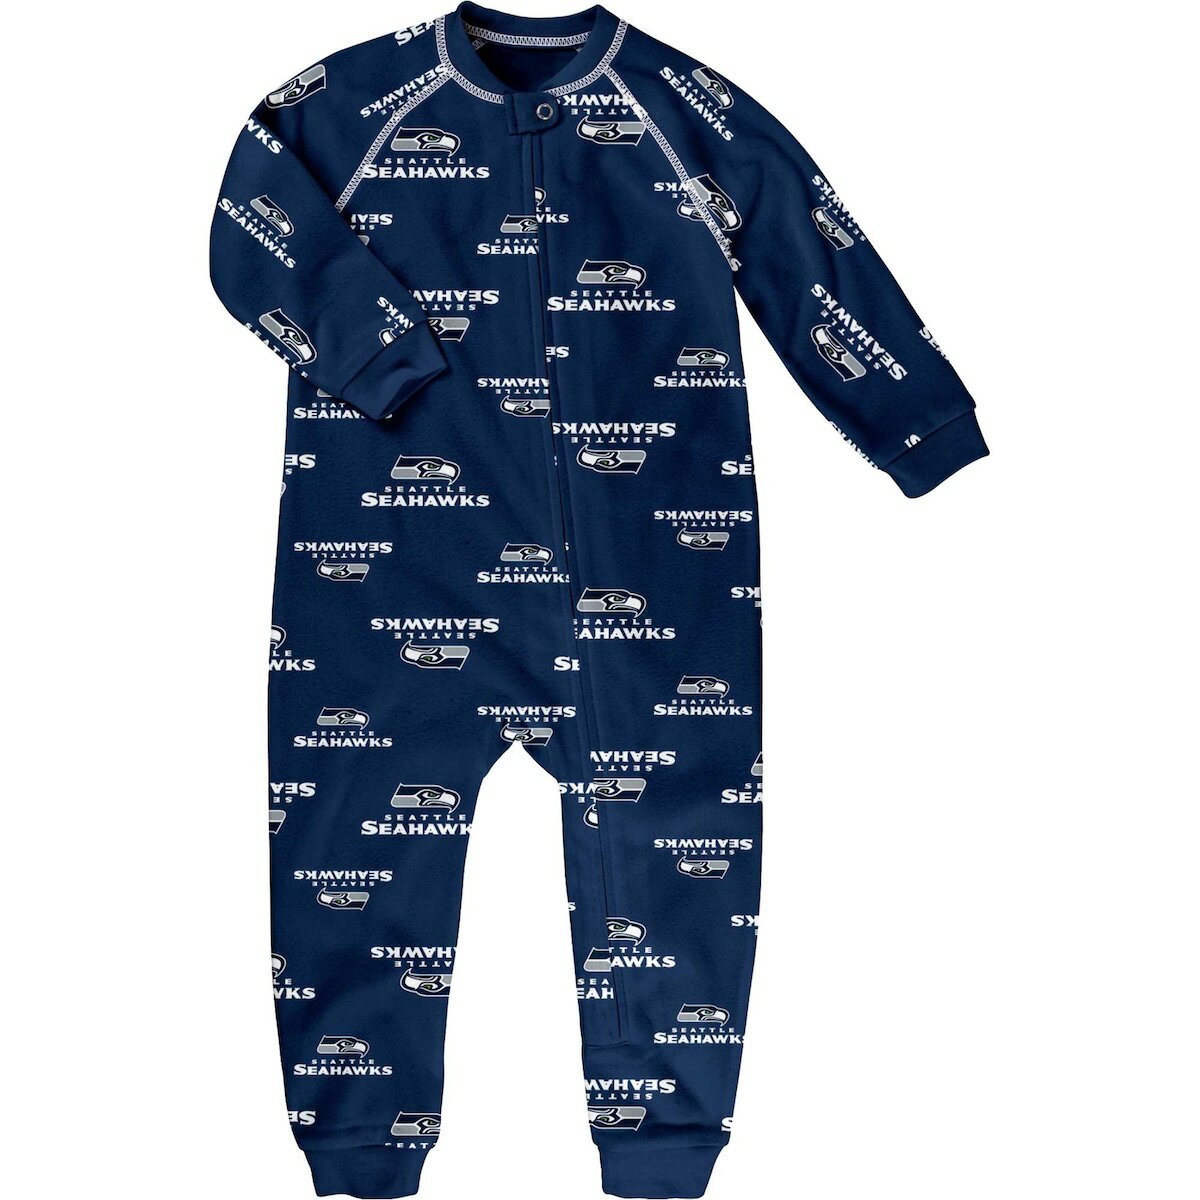 Provide your budding Seattle Seahawks fan with comfort and spirit each night by dressing them in this full-zip sleeper. It features roomy raglan sleeves so they can stretch, crawl and sleep in comfort. An allover Seattle Seahawks print easily displays which team they'll root for each game day.Snap closure at neckMaterial: 100% PolyesterMachine wash with garment inside out, tumble dry lowOfficially licensedFlatlock stitchingImportedFull-zipRaglan sleevesBrand: OuterstuffSublimated graphicsInseam on size 3T measures approx. 15"